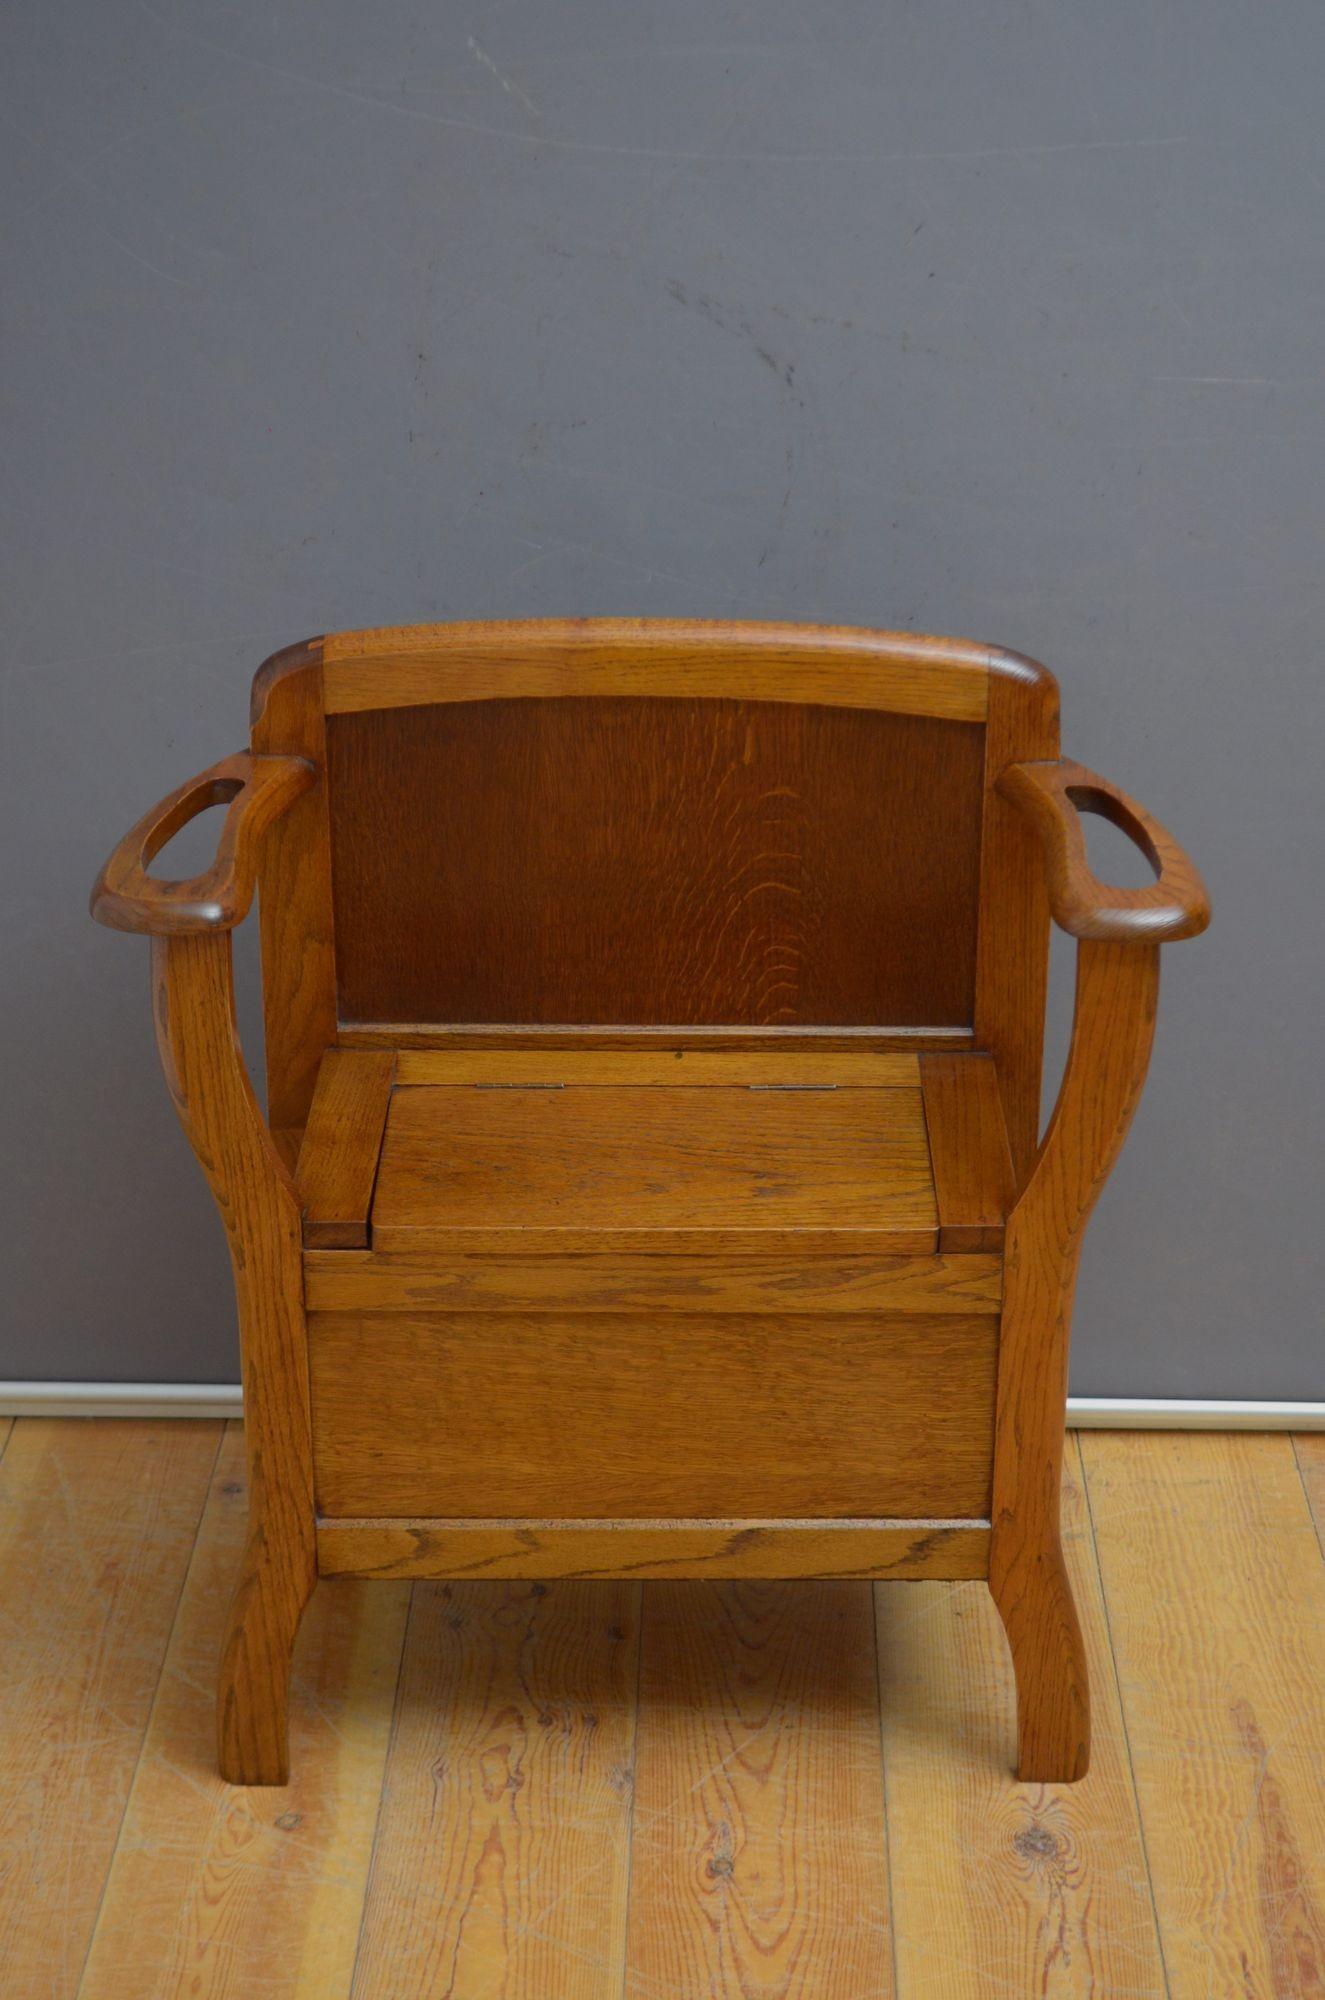 K0580 Very attractive Art Deco hall seat by Kubbyland, having shaped and panelled back and lift up seat with storage compartment, all flanked by open arms with umbrella holders, all standing on shaped legs enclosing original drip trays. This antique